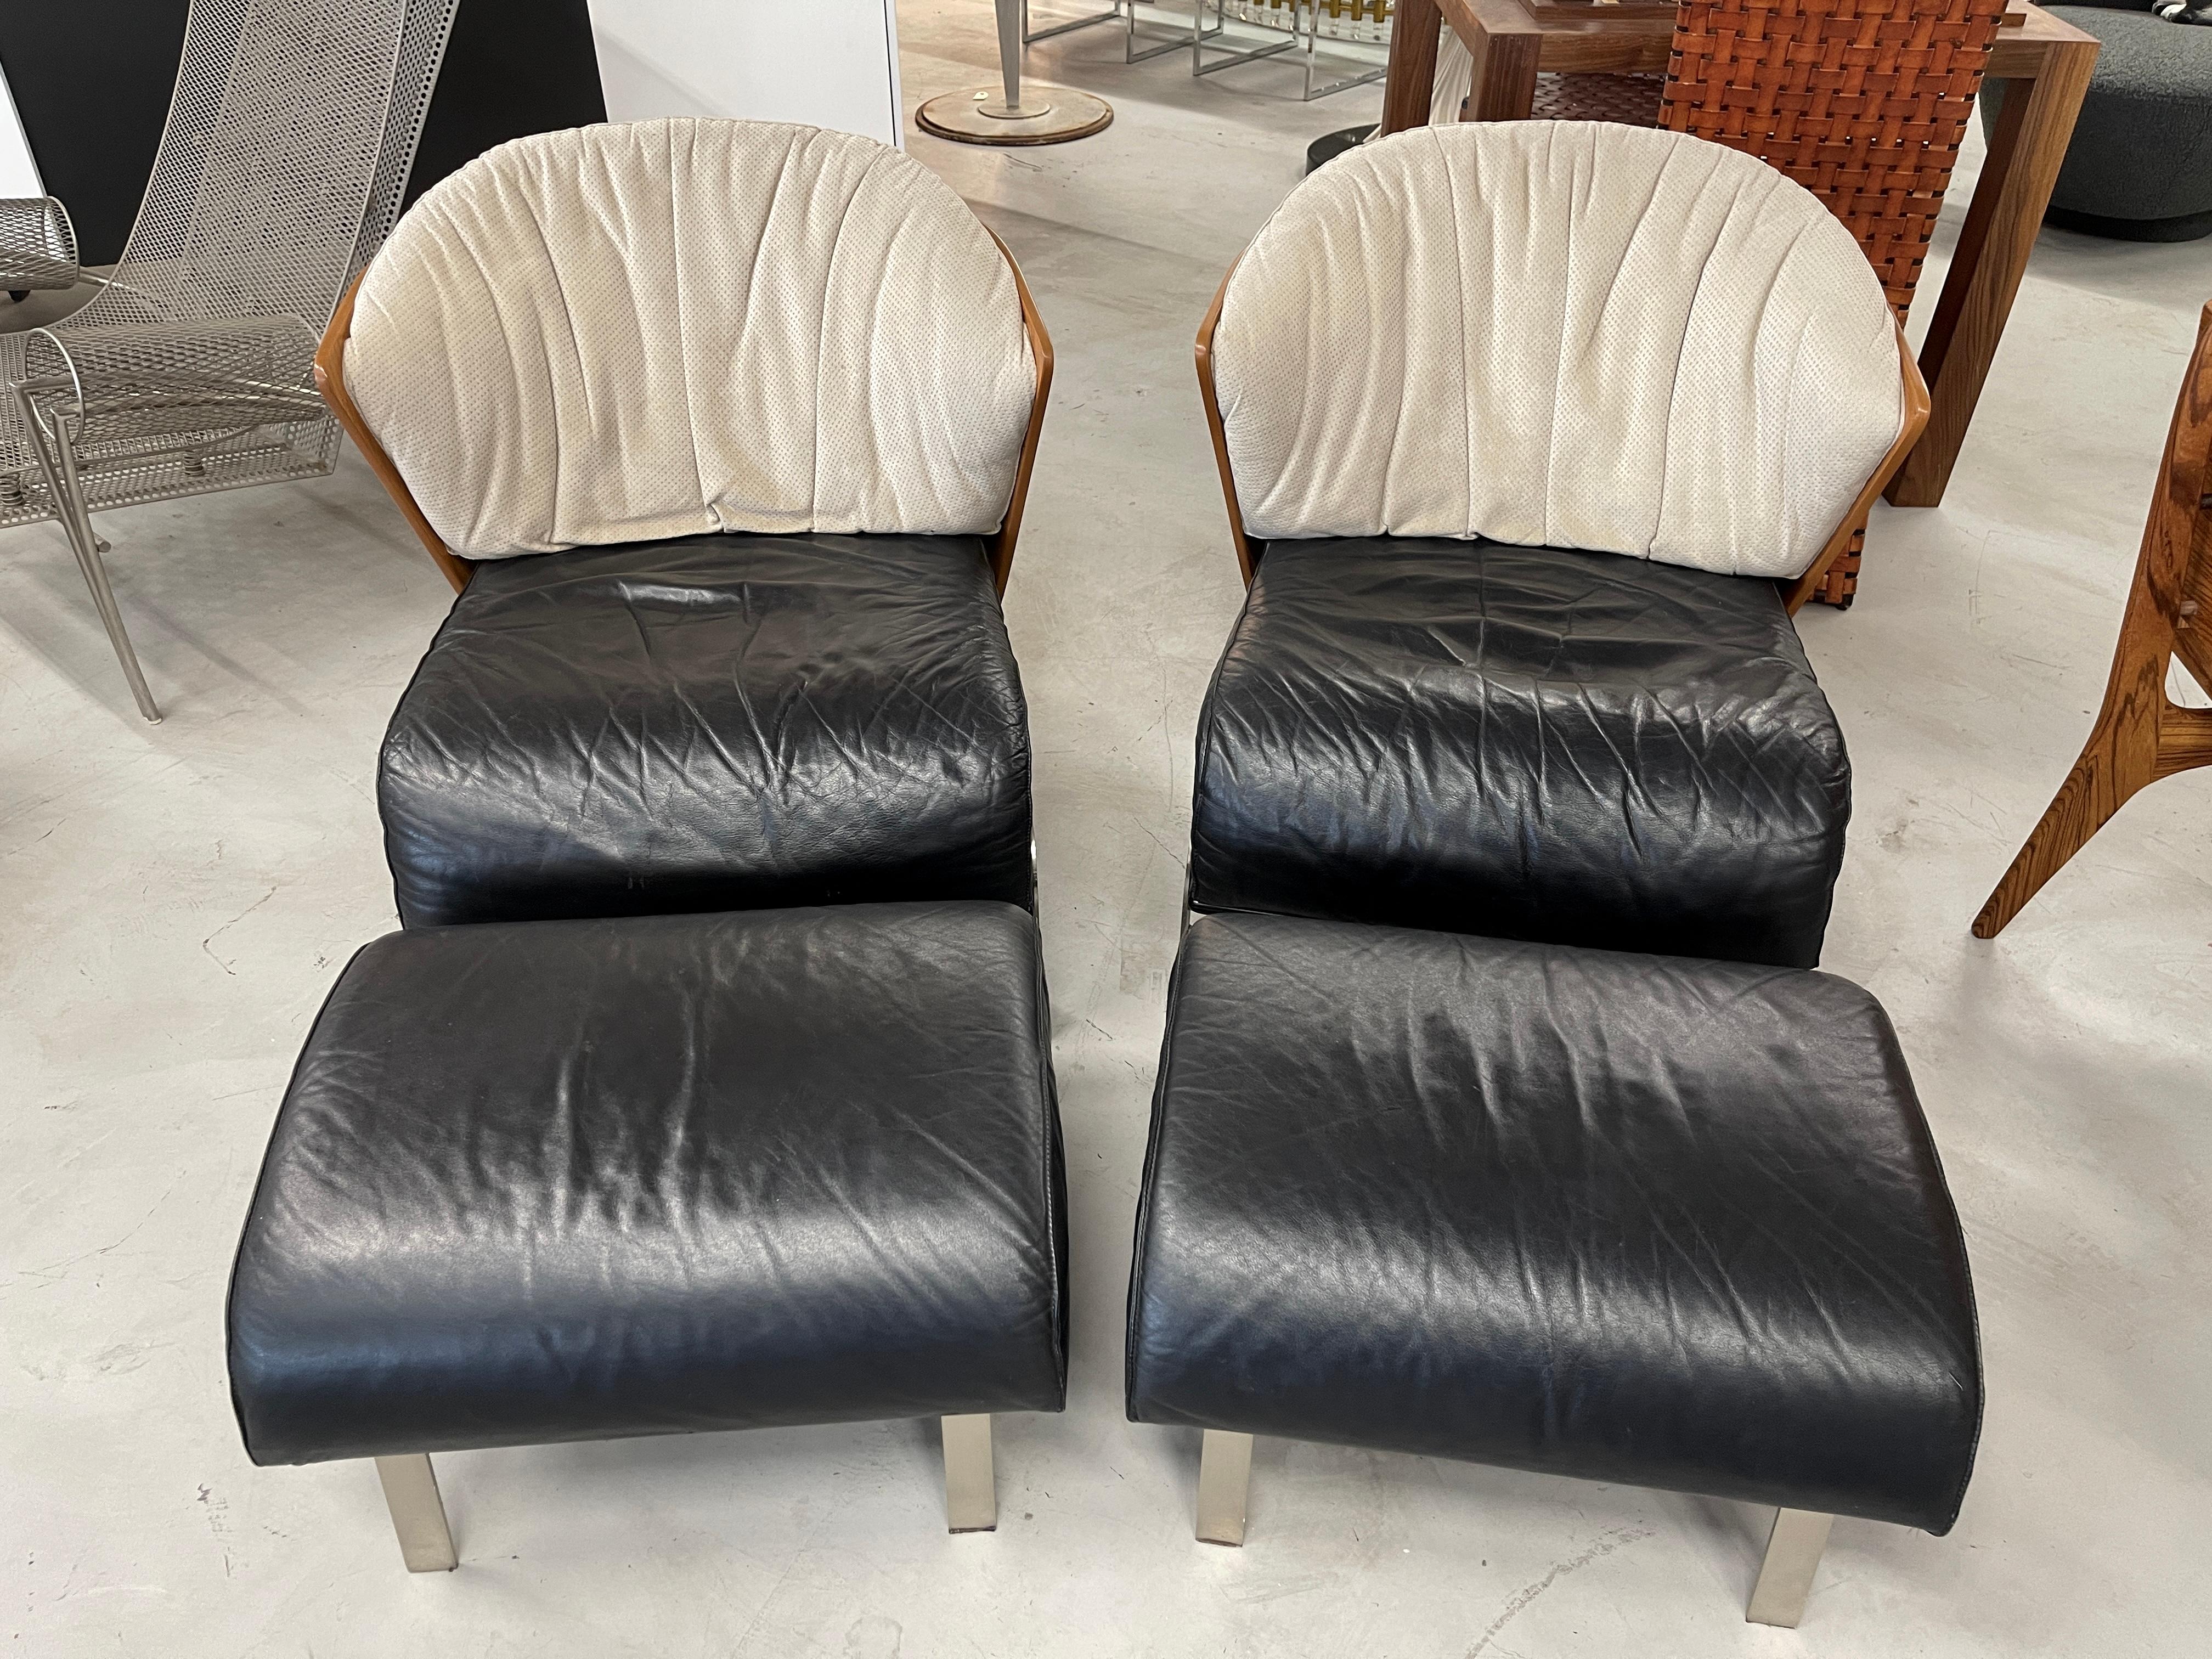 Wonderful pair of Elba chairs and ottoman by Franco Raggi for Cappellini. These were first designed in 1983 and produced in the 1980s through the late 1990's. This production is from the 1990's when they were purchased. Beautiful elegant lines with